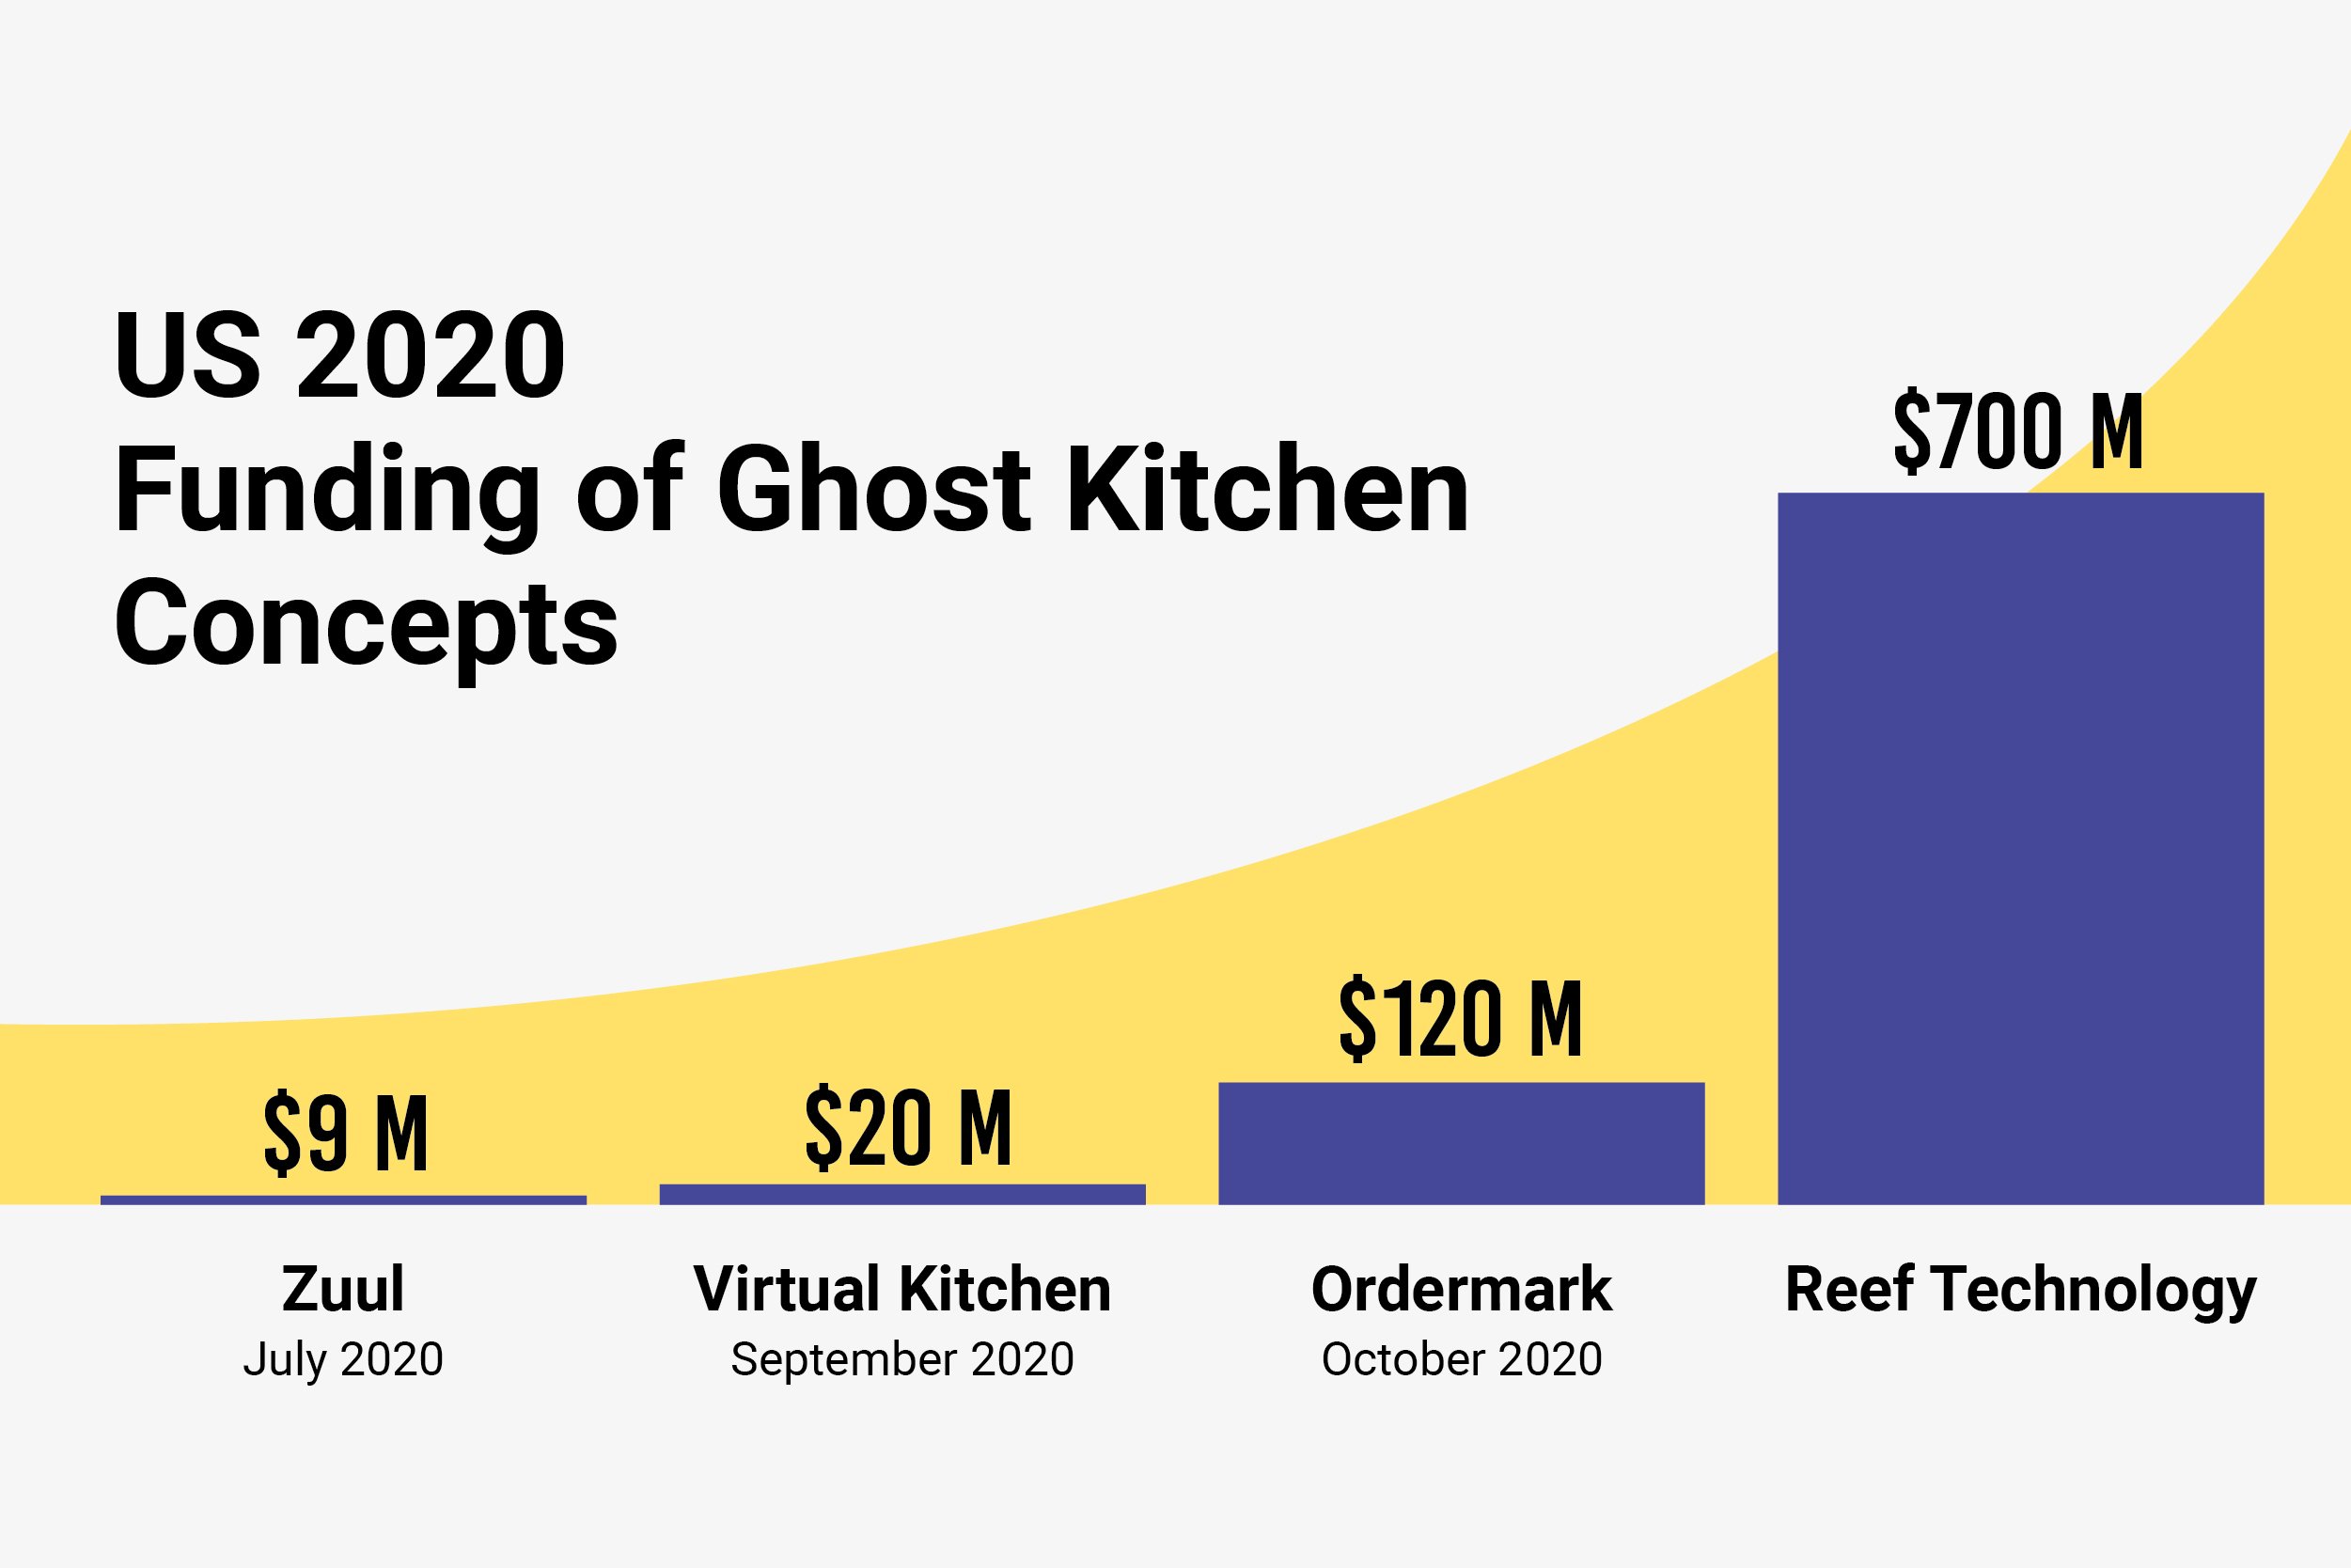 Ghost Kitchen funding in the U.S.